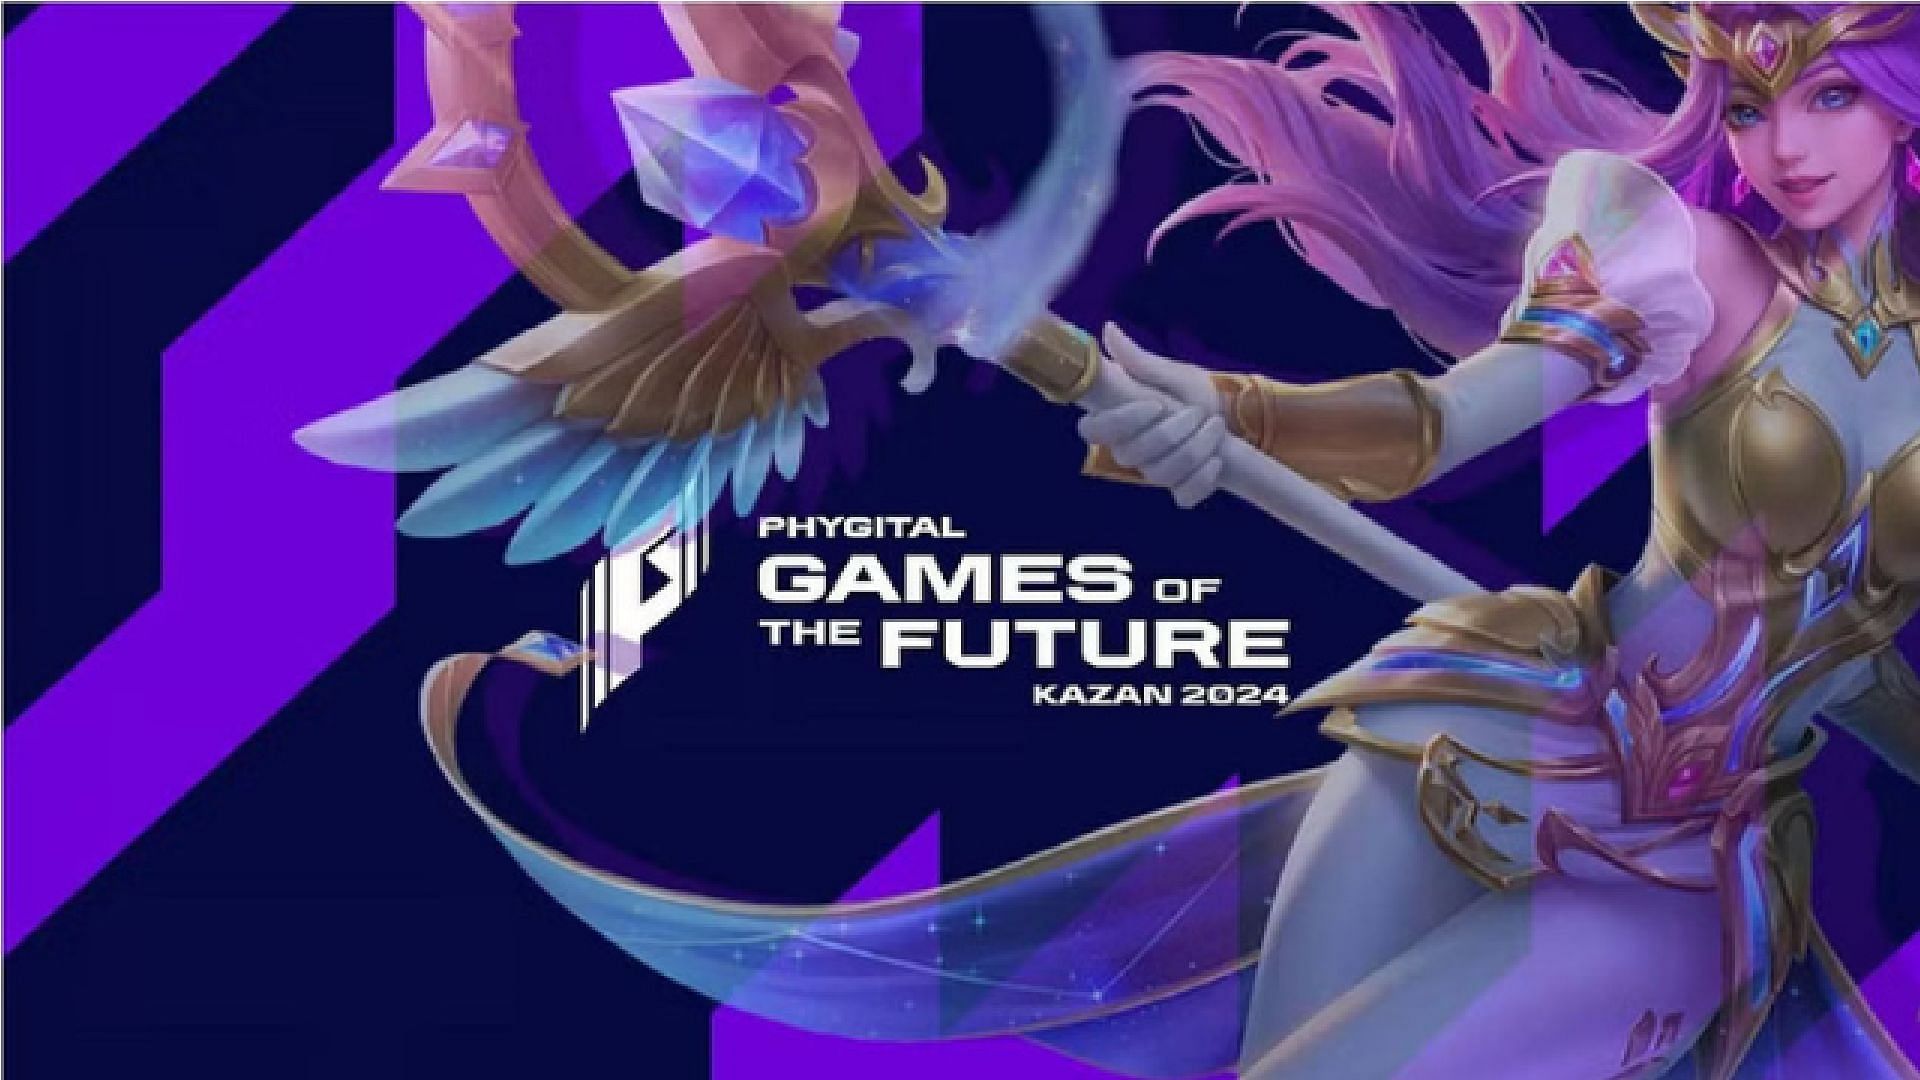 MLBB Games of the Future 2024 has some interesting matches (Image via Games of the Future)